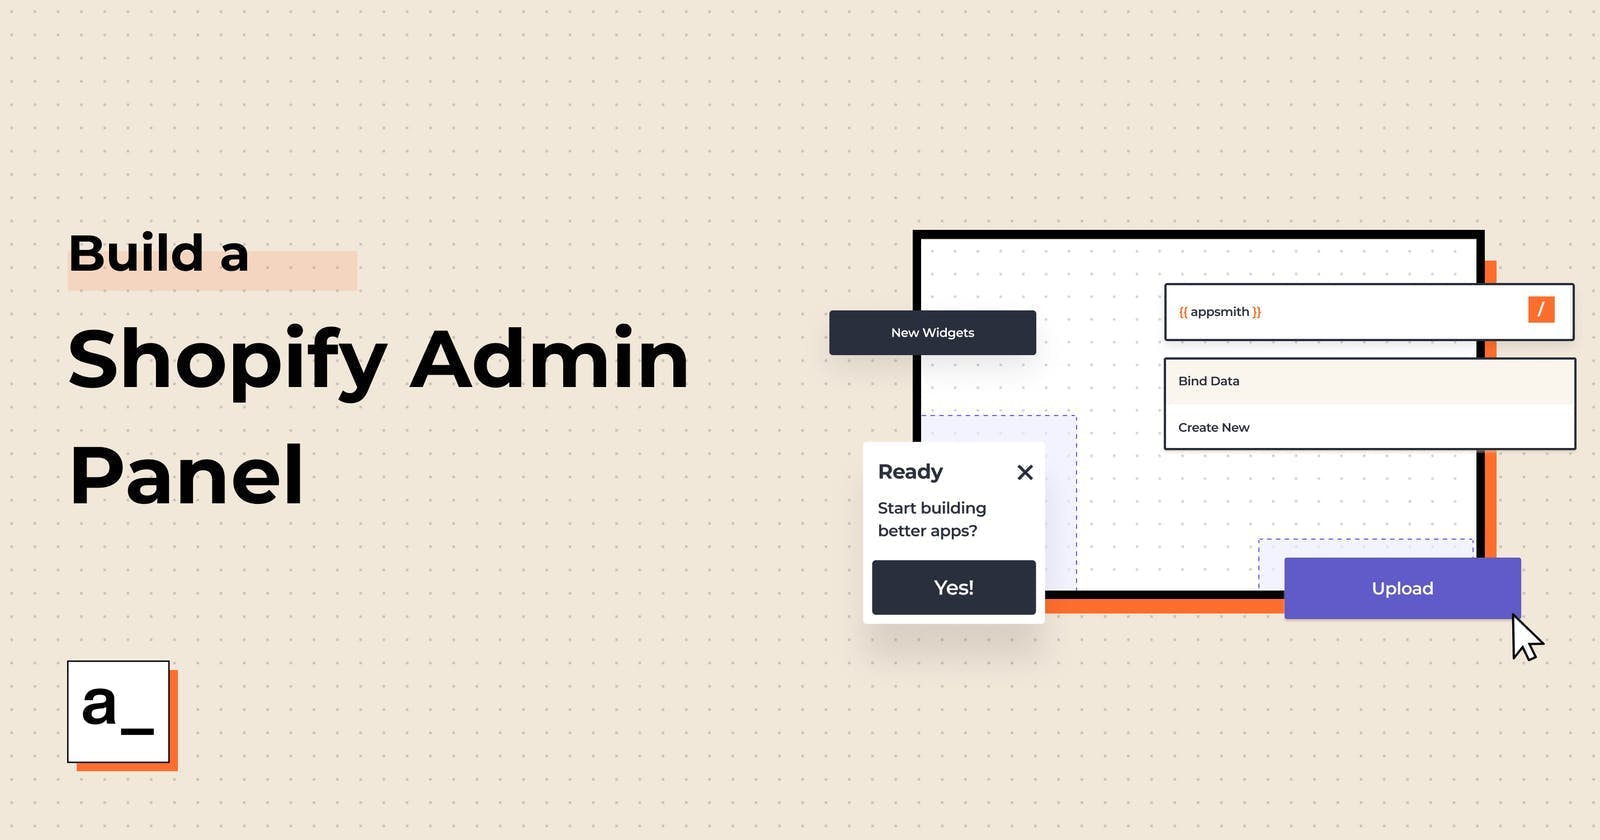 SEO | Building a Shopify Admin Panel: A Step by Step Guide